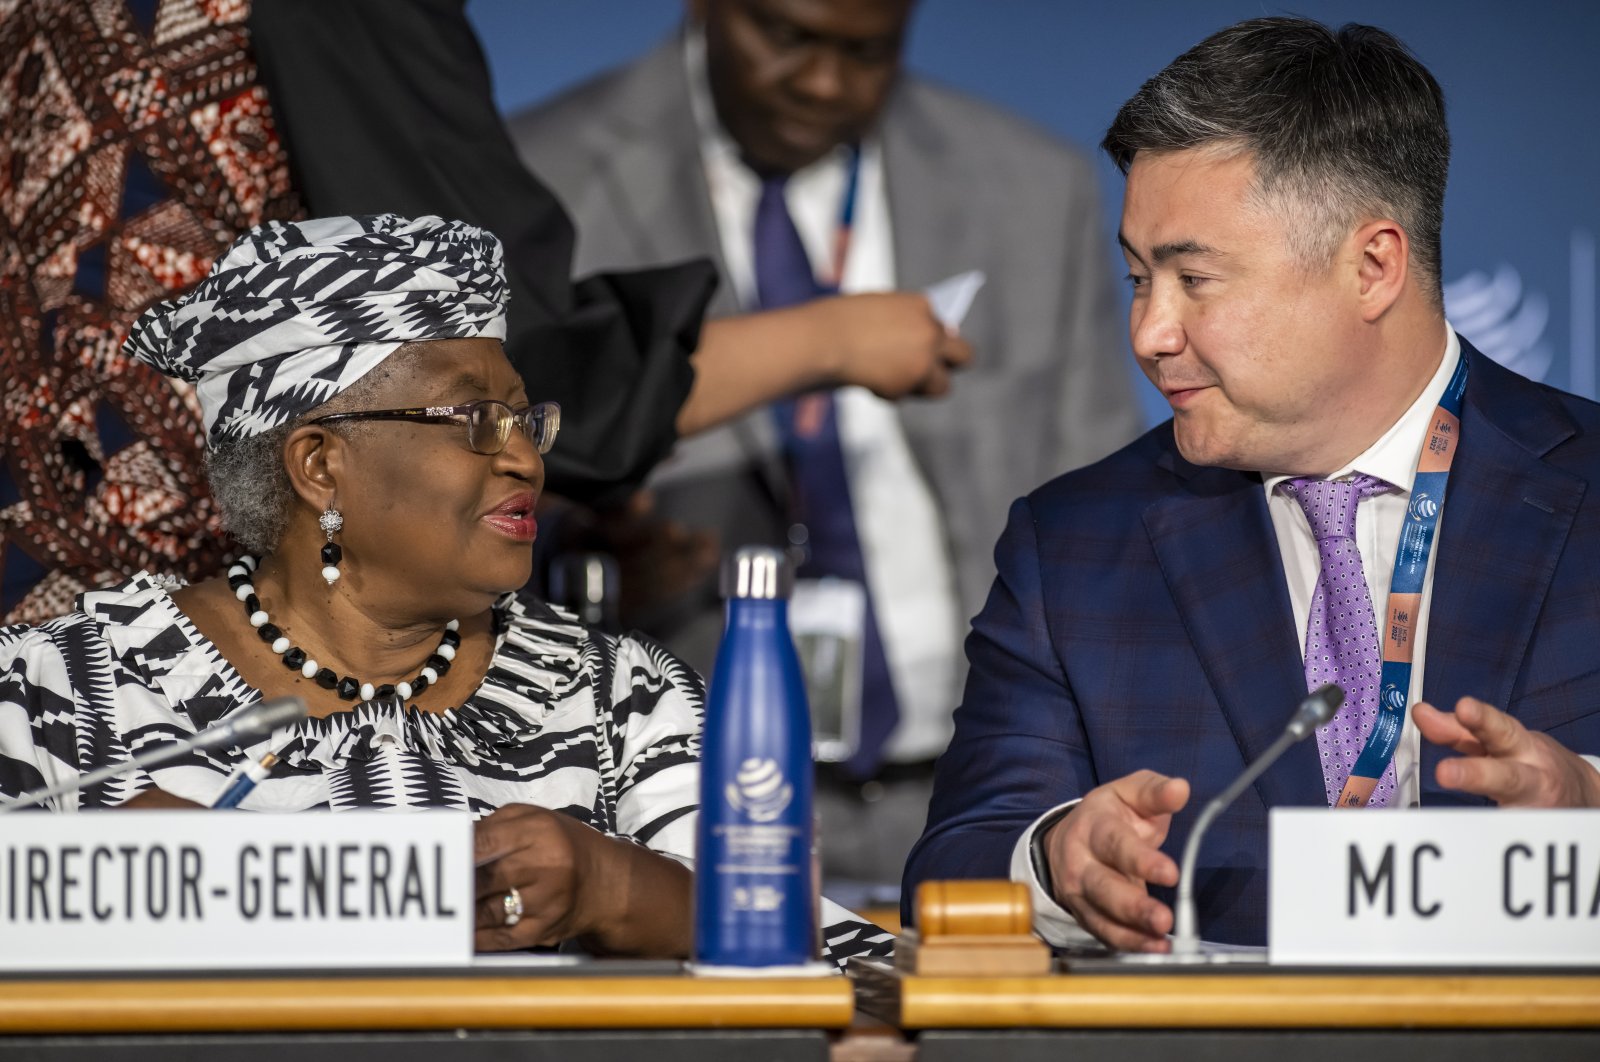 Director-General of the World Trade Organization Ngozi Okonjo-Iweala (L) and MC12 Chair Timur Suleimenov speak at the opening ceremony of the 12th Ministerial Conference at the headquarters of the World Trade Organization, Geneva, Switzerland, June 12, 2022. (EPA Photo)